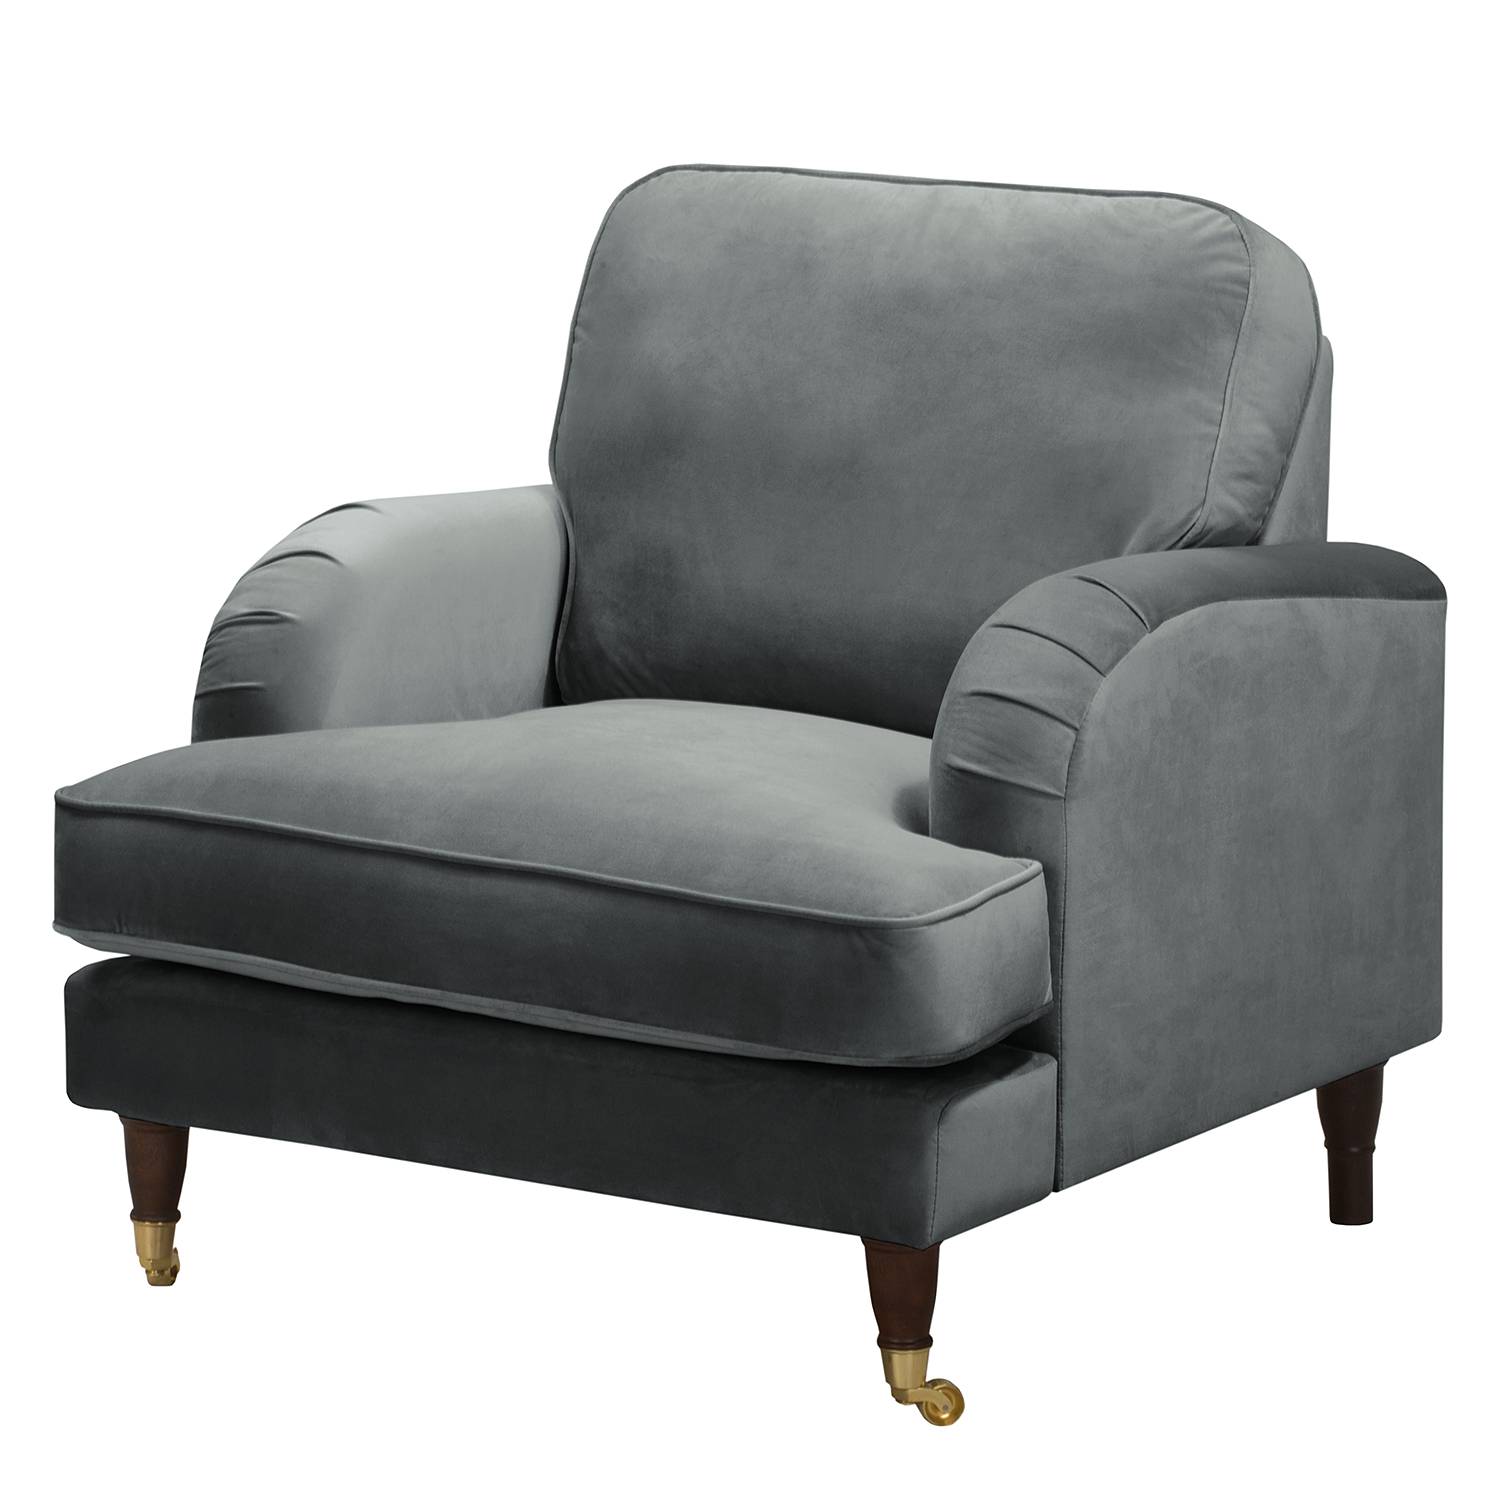 Image of Fauteuil Bethania I 000000001000145884